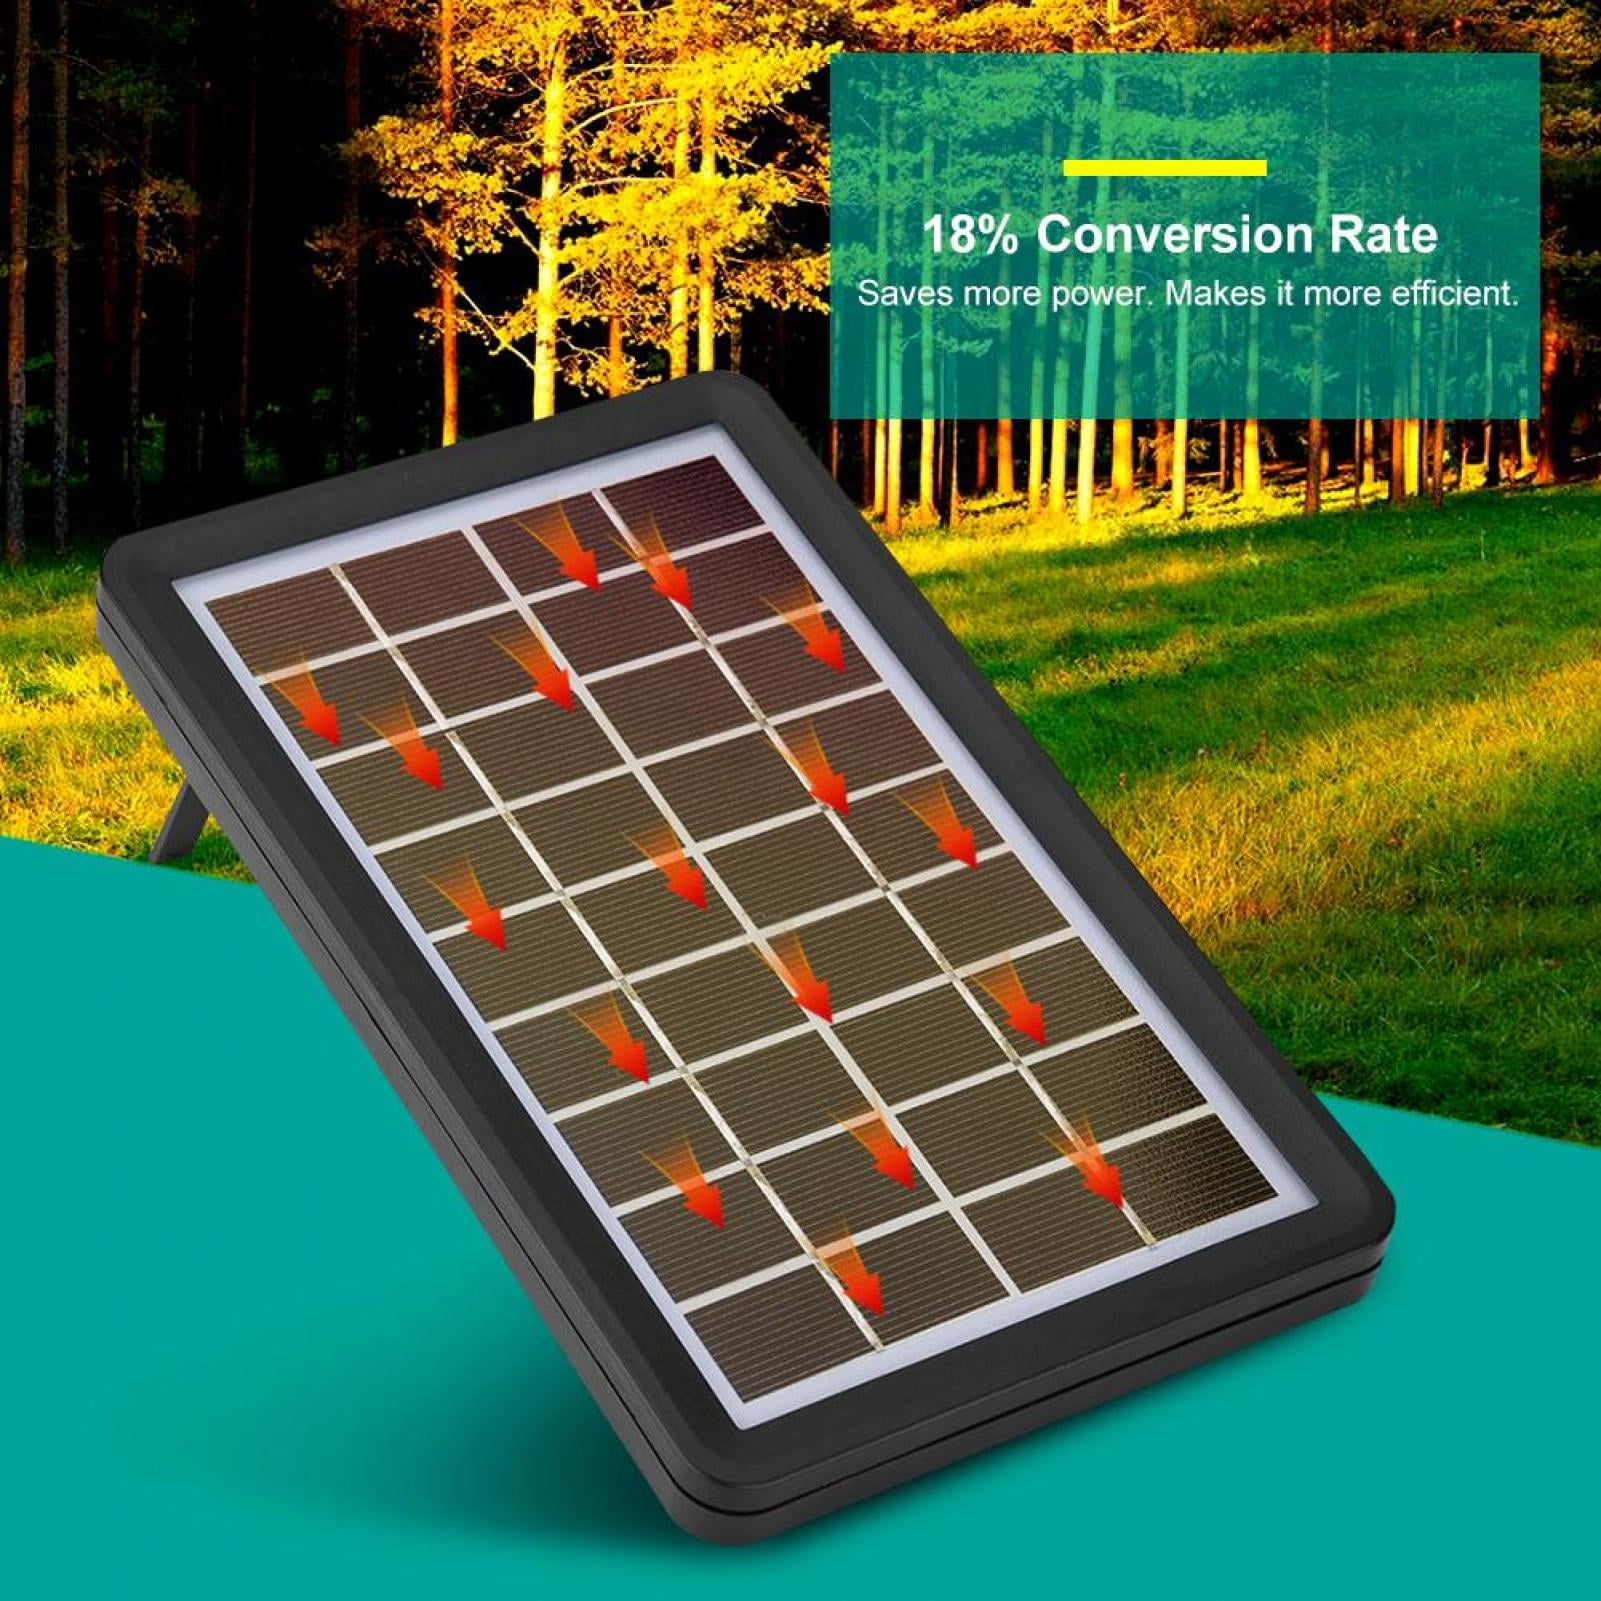 18% High Conversion Rate/ 93% Ultra-High Light Transmittance/Safe Waterproof Portable Solar Charger Solar Panel 9V 3W Poly Silicon Solar Cell Board Wireless External Battery